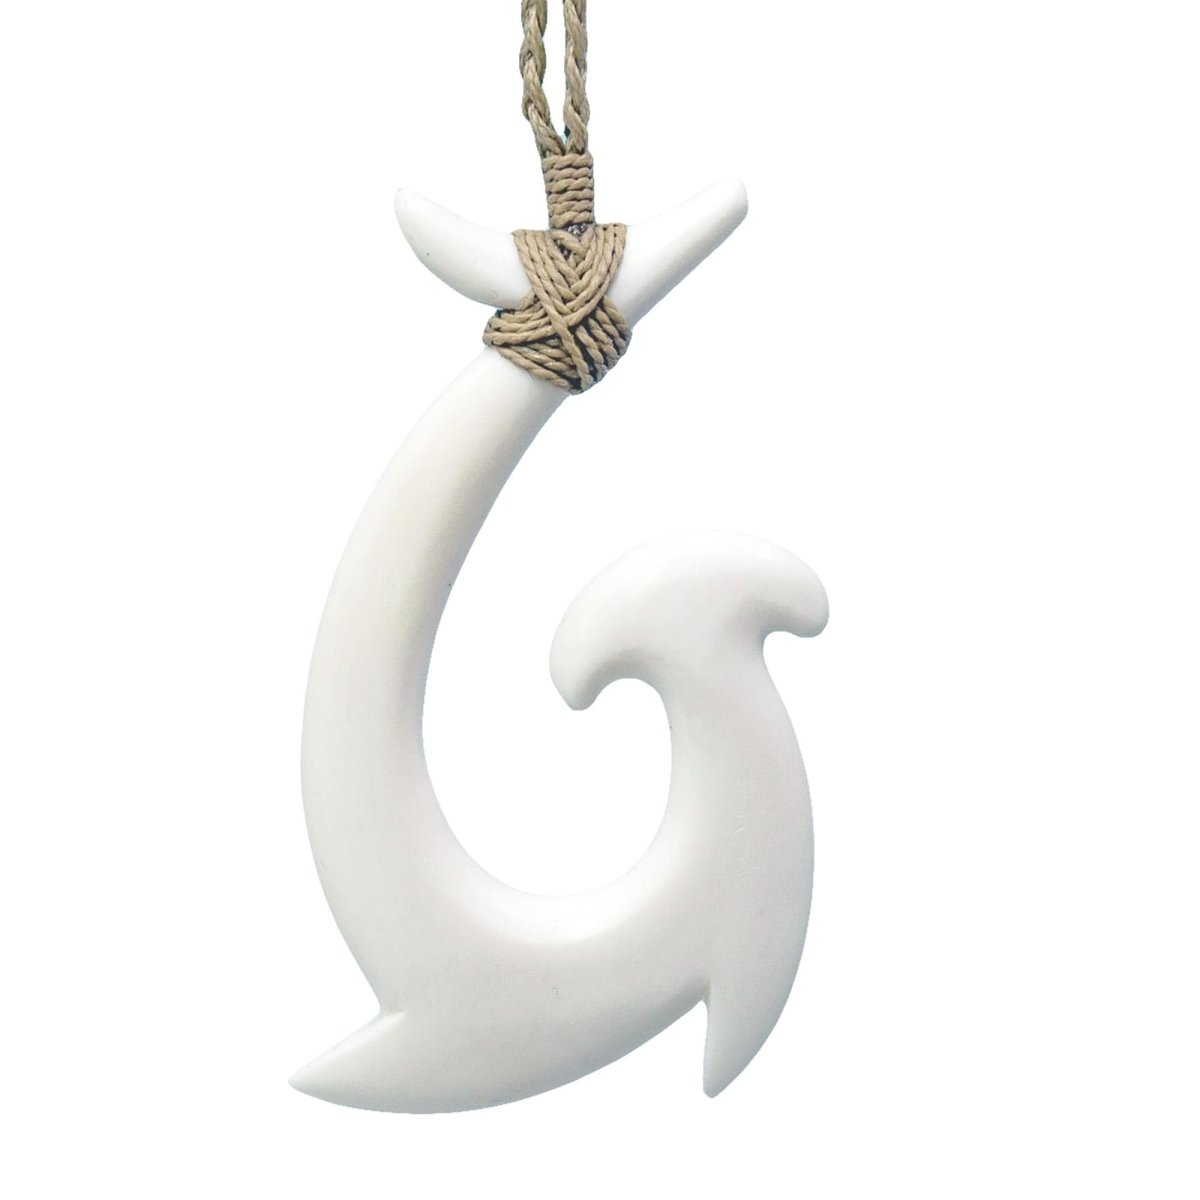 Earthbound Pacific Hand Carved Bone Maori Stylized Fish Hook